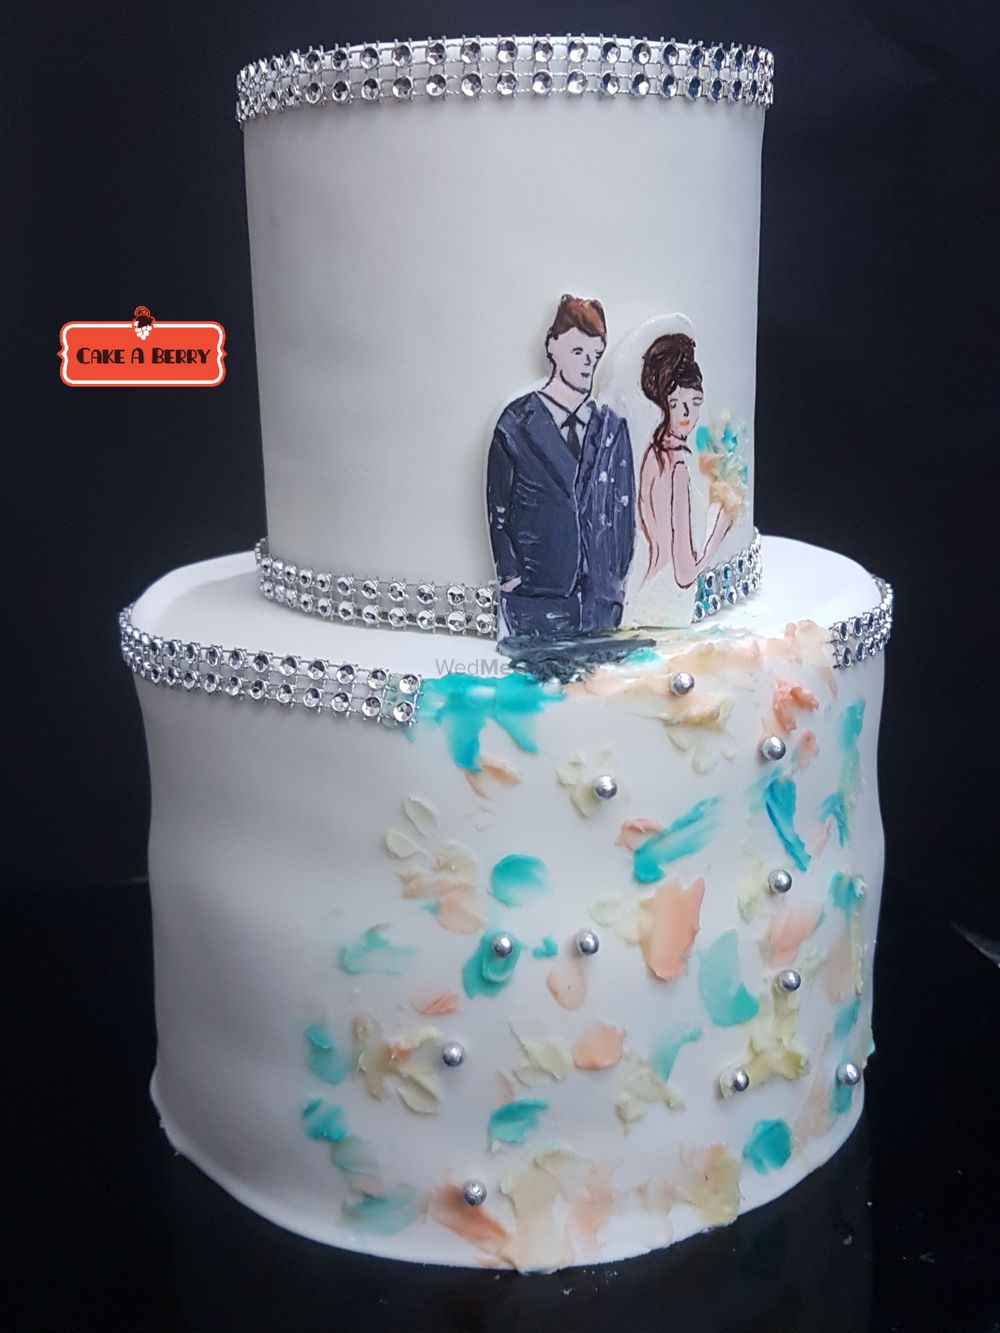 Photo From wedding cakes - By Cake A Berry